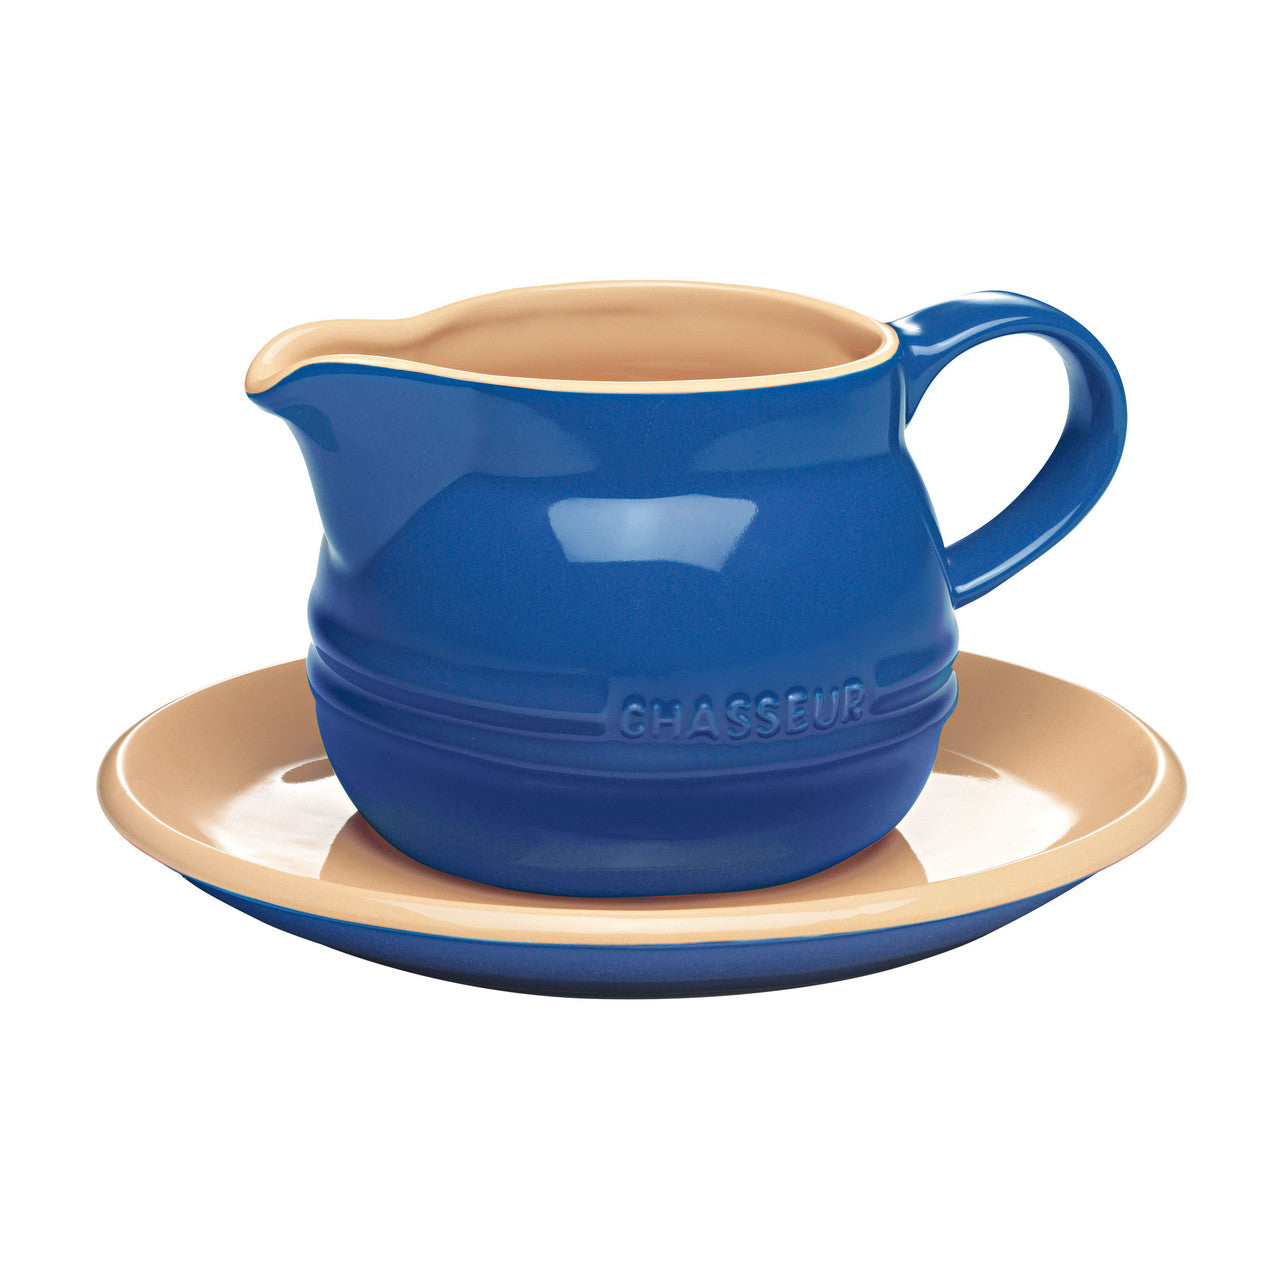 Chasseur - GRAVY BOAT 450ml WITH SAUCER - BLUE